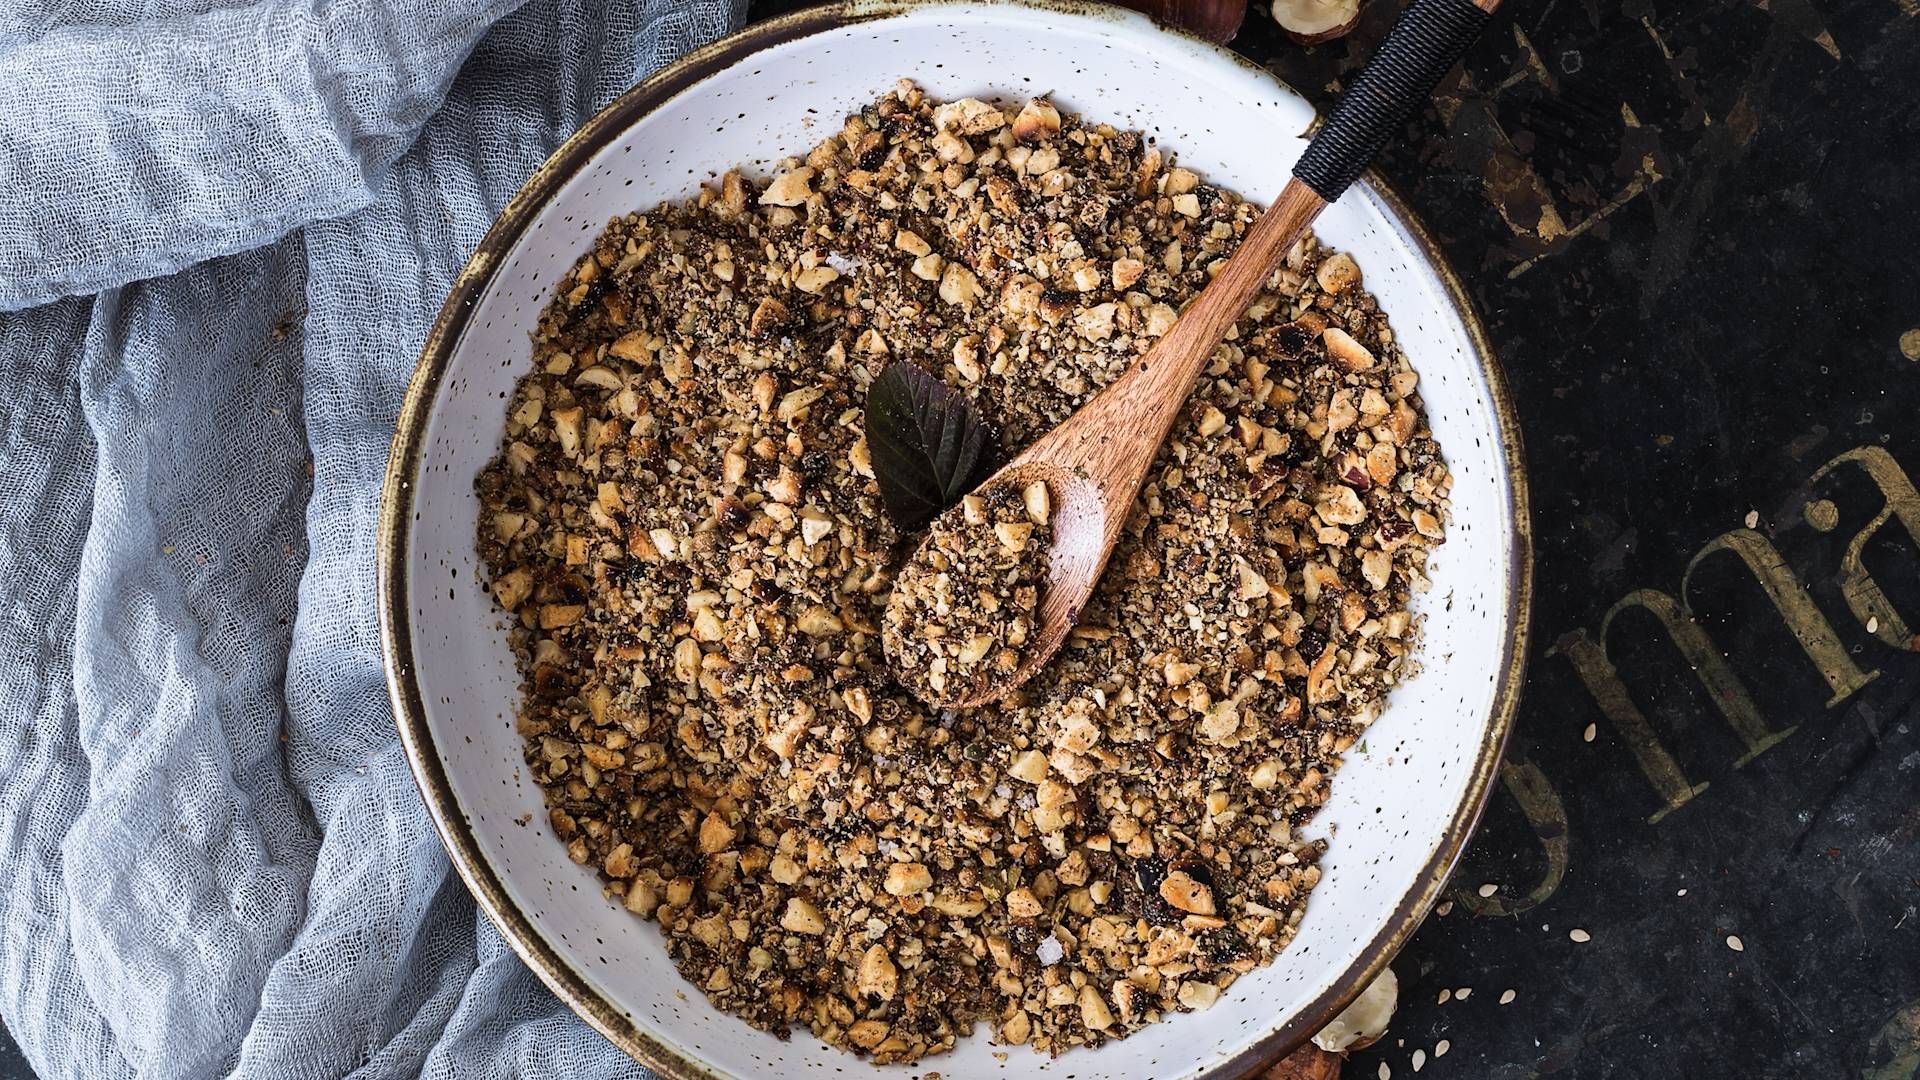 Dukkah is an Egyptian spice, nut and seed blend perfect for sprinkling on a variety of dishes.